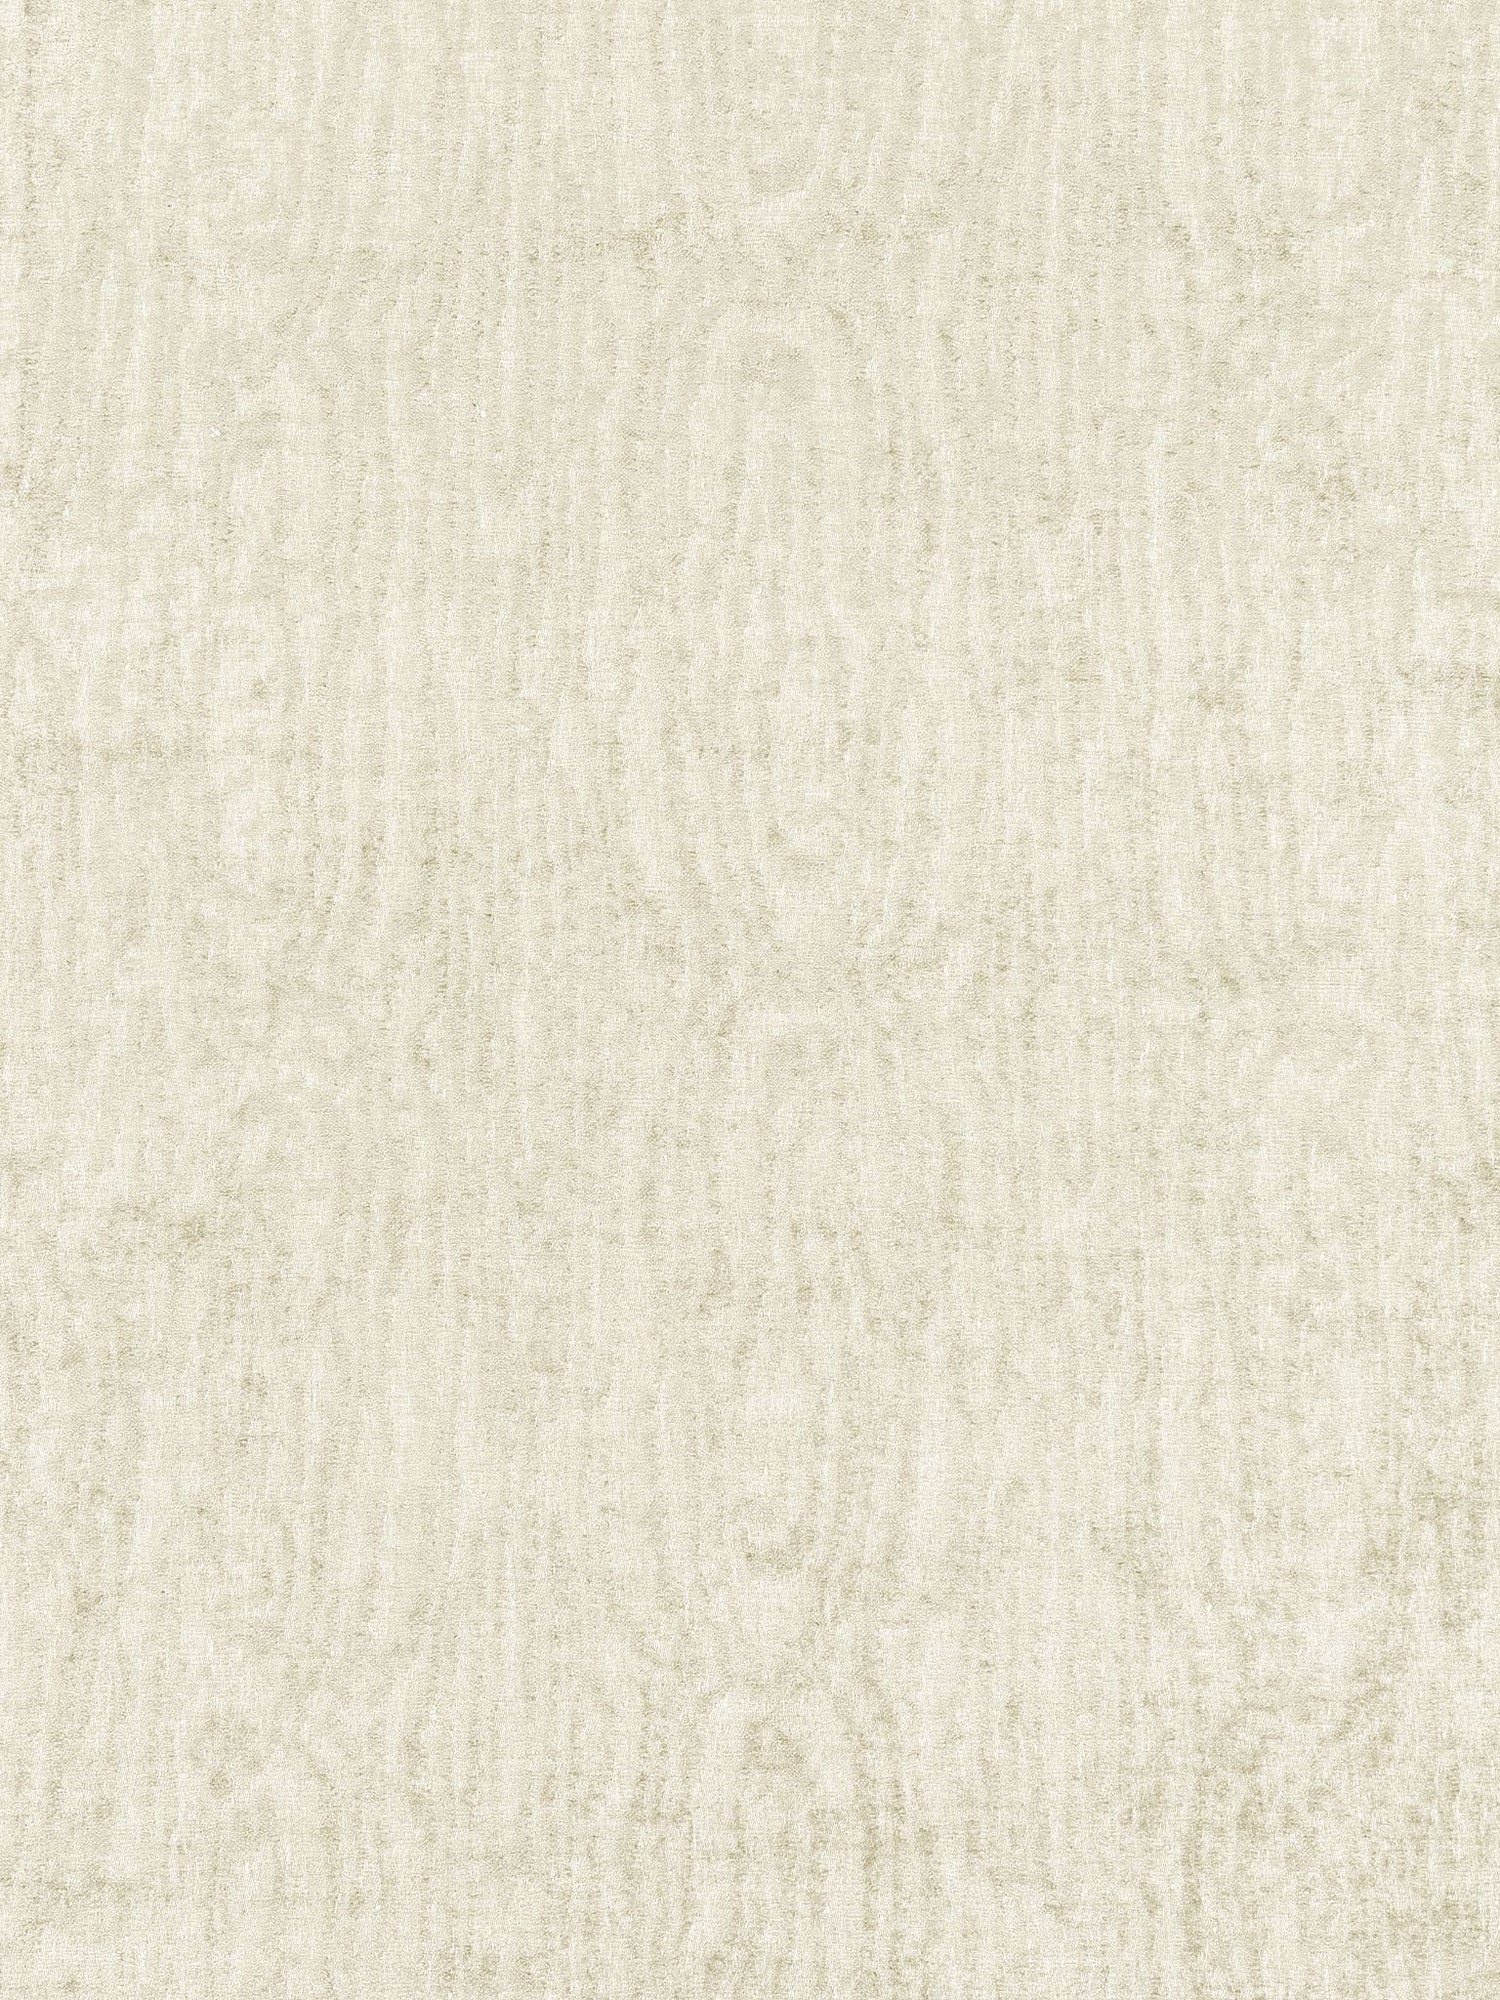 Whitby fabric in winter white color - pattern number N3 00025102 - by Scalamandre in the Old World Weavers collection